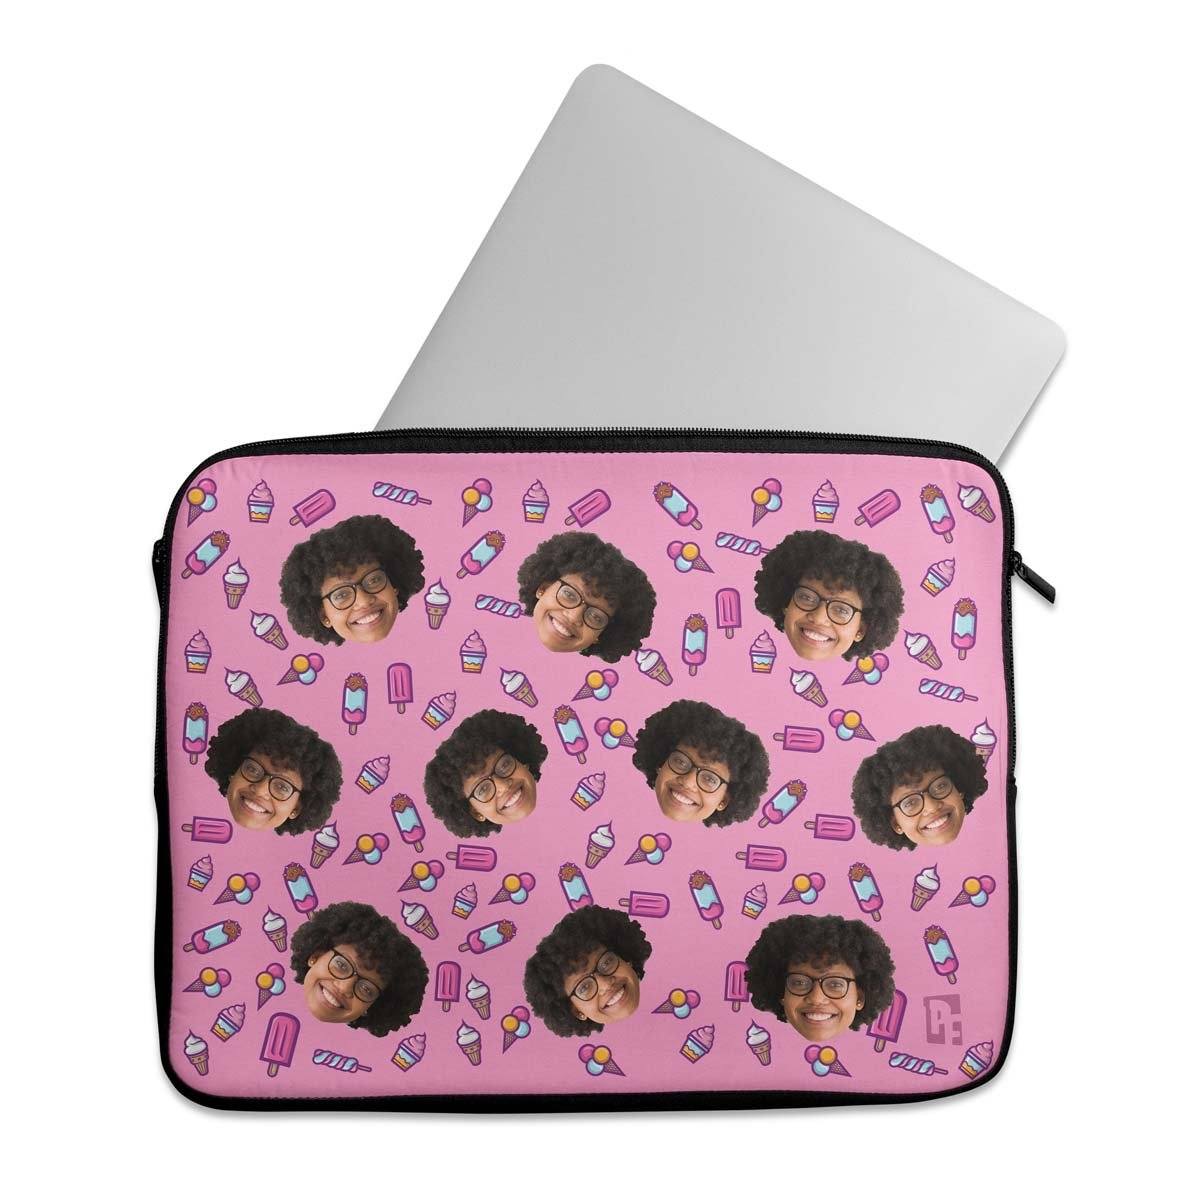 Candies Personalized Laptop Sleeve